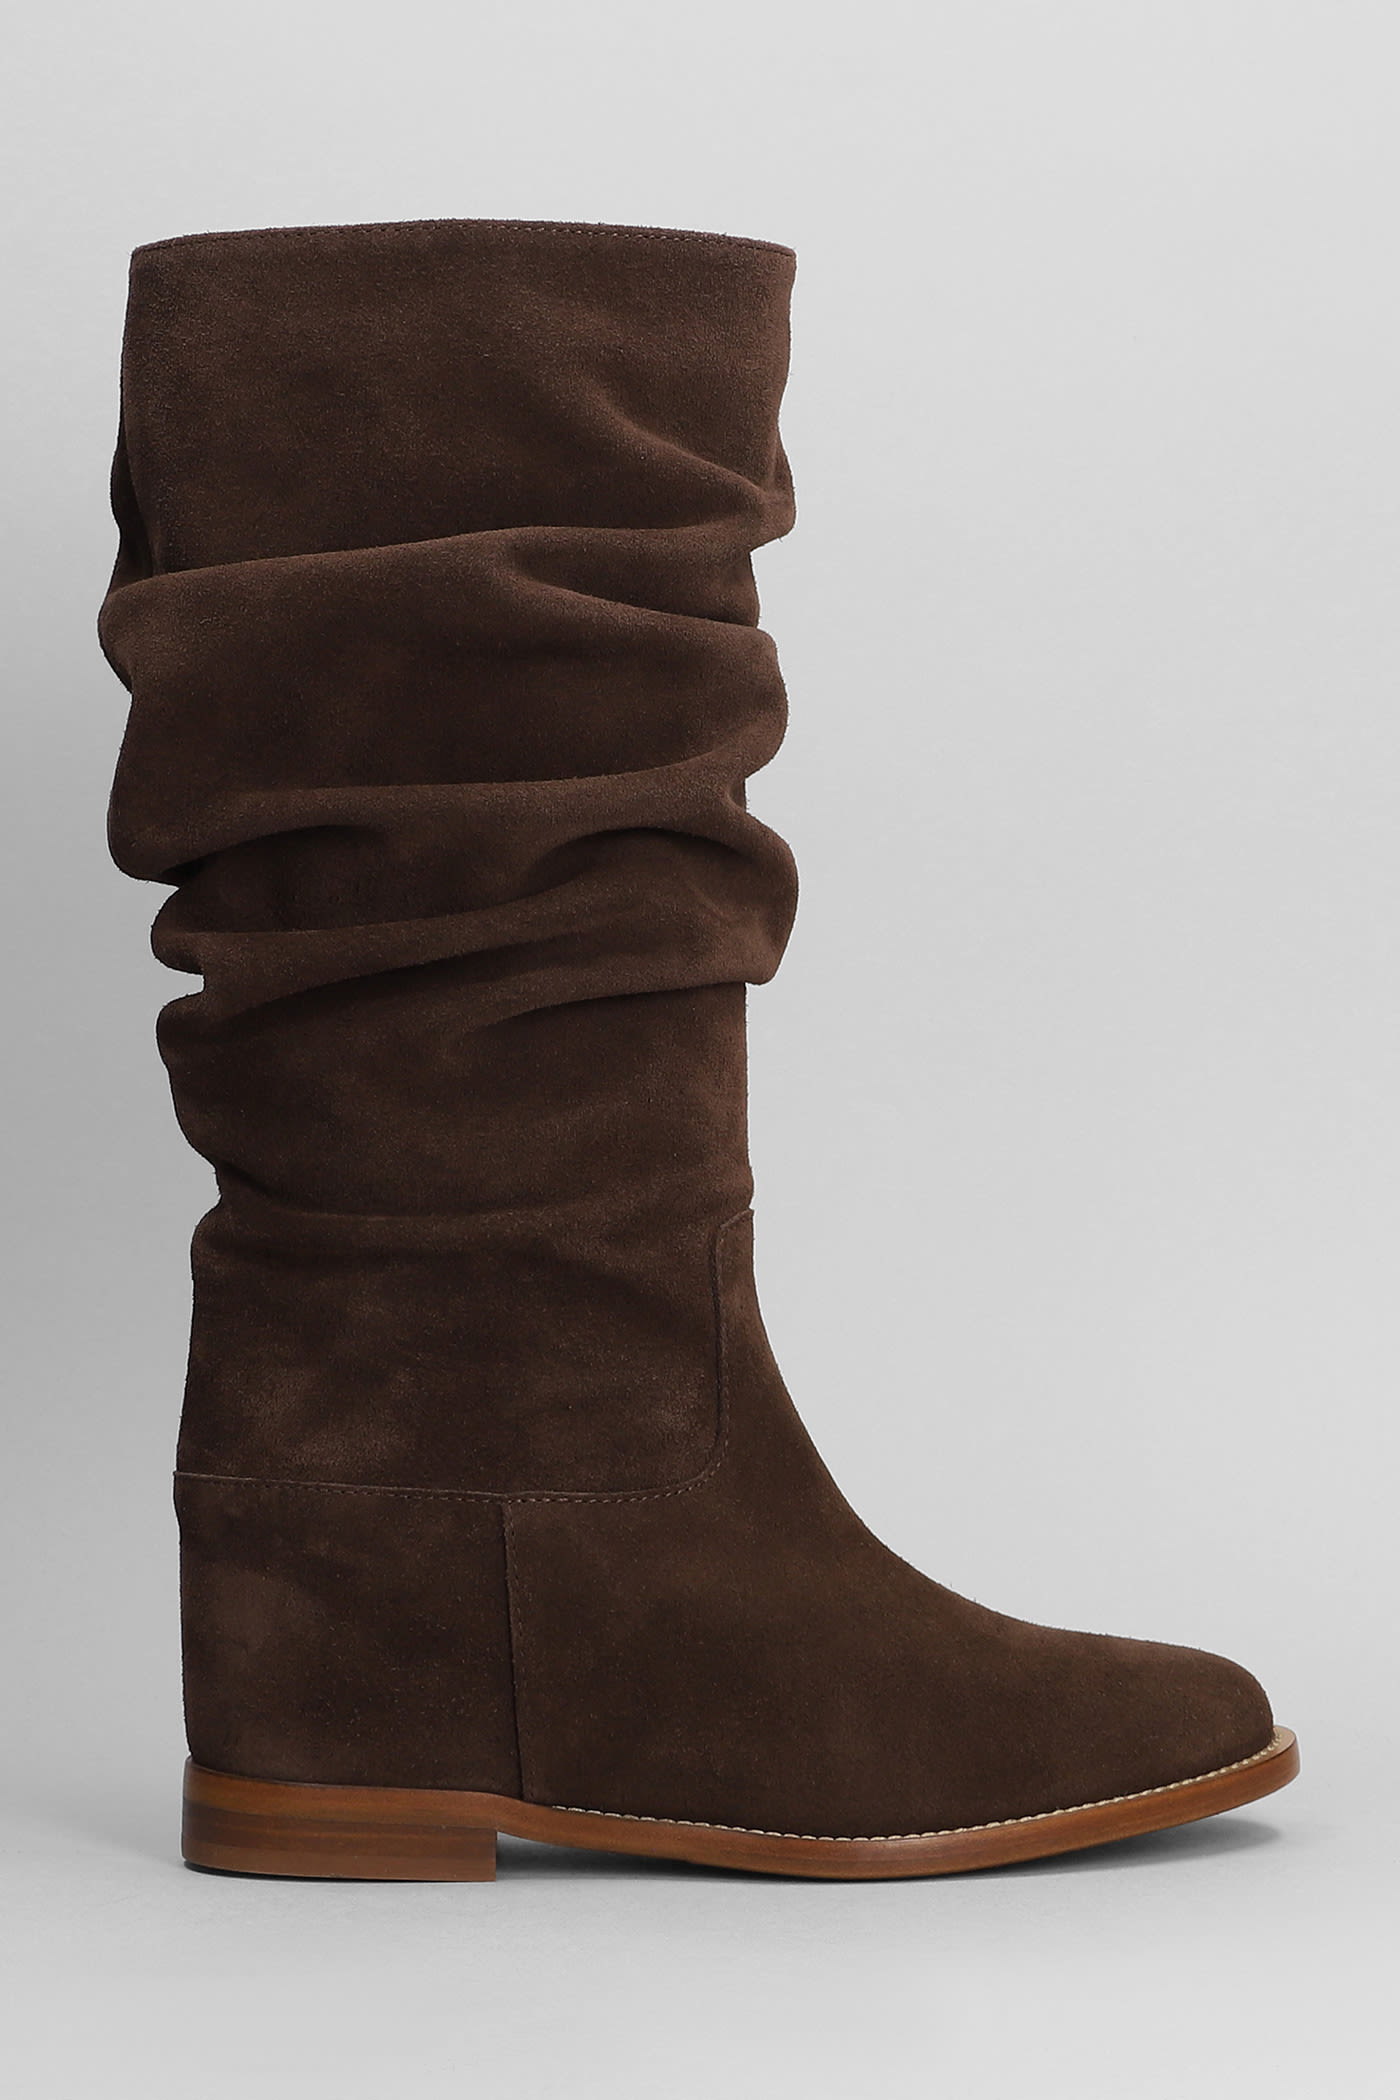 In Brown Suede